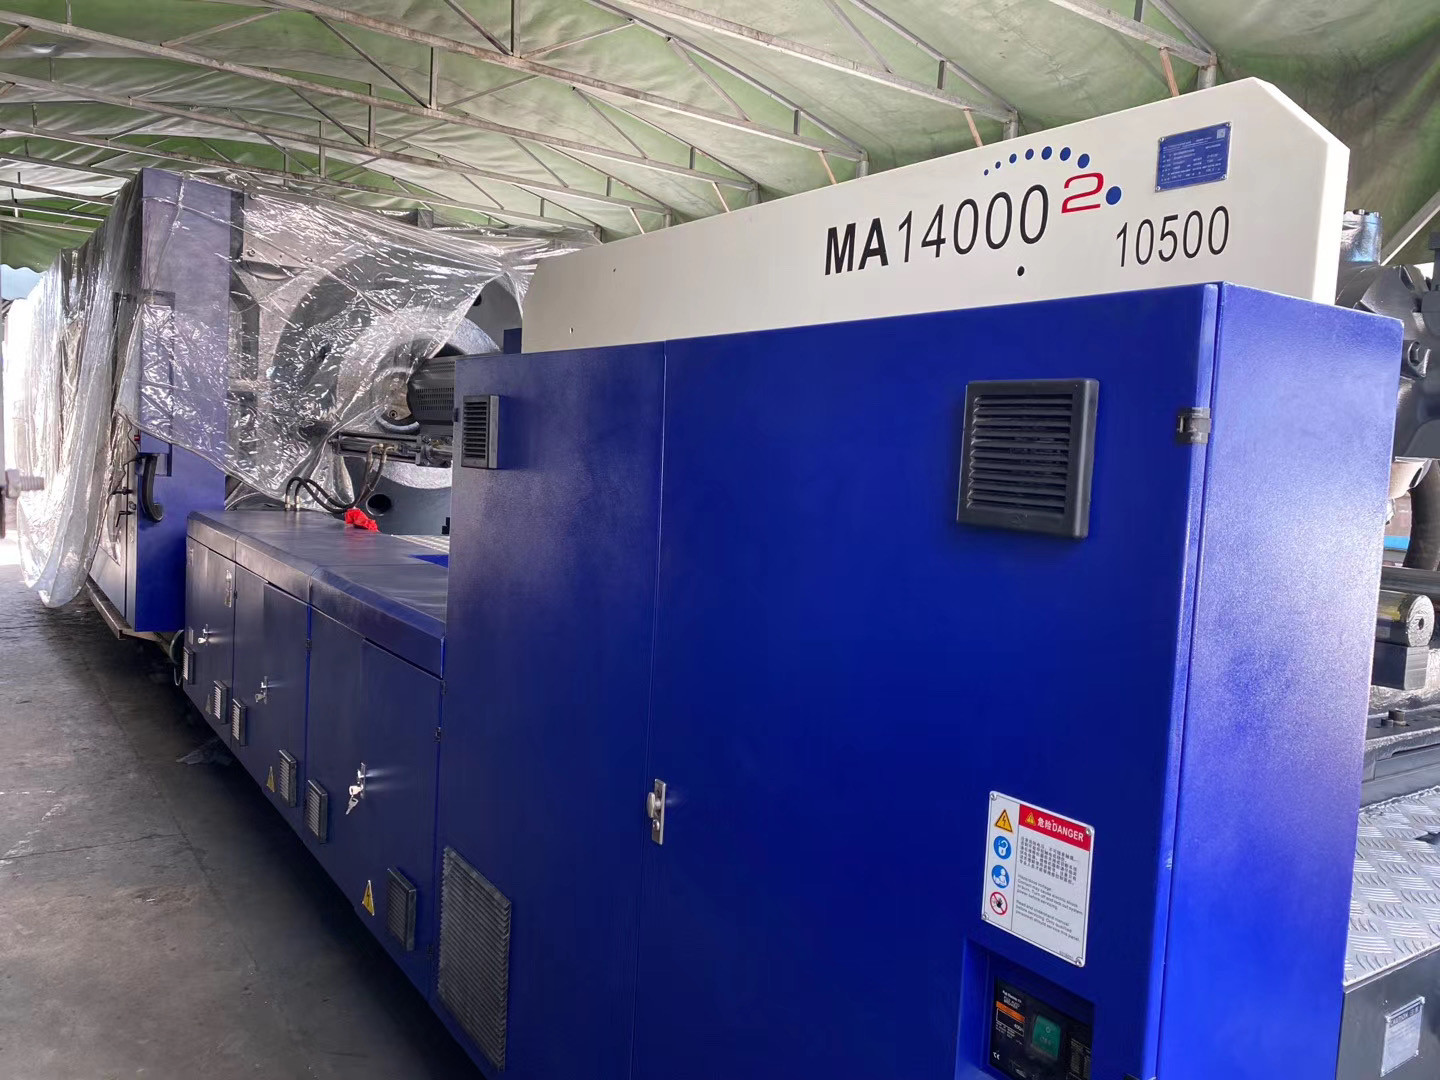  Used 1400Ton Plastic Crate Injection Molding Machine Haitian MA14000 Energy Saving Manufactures